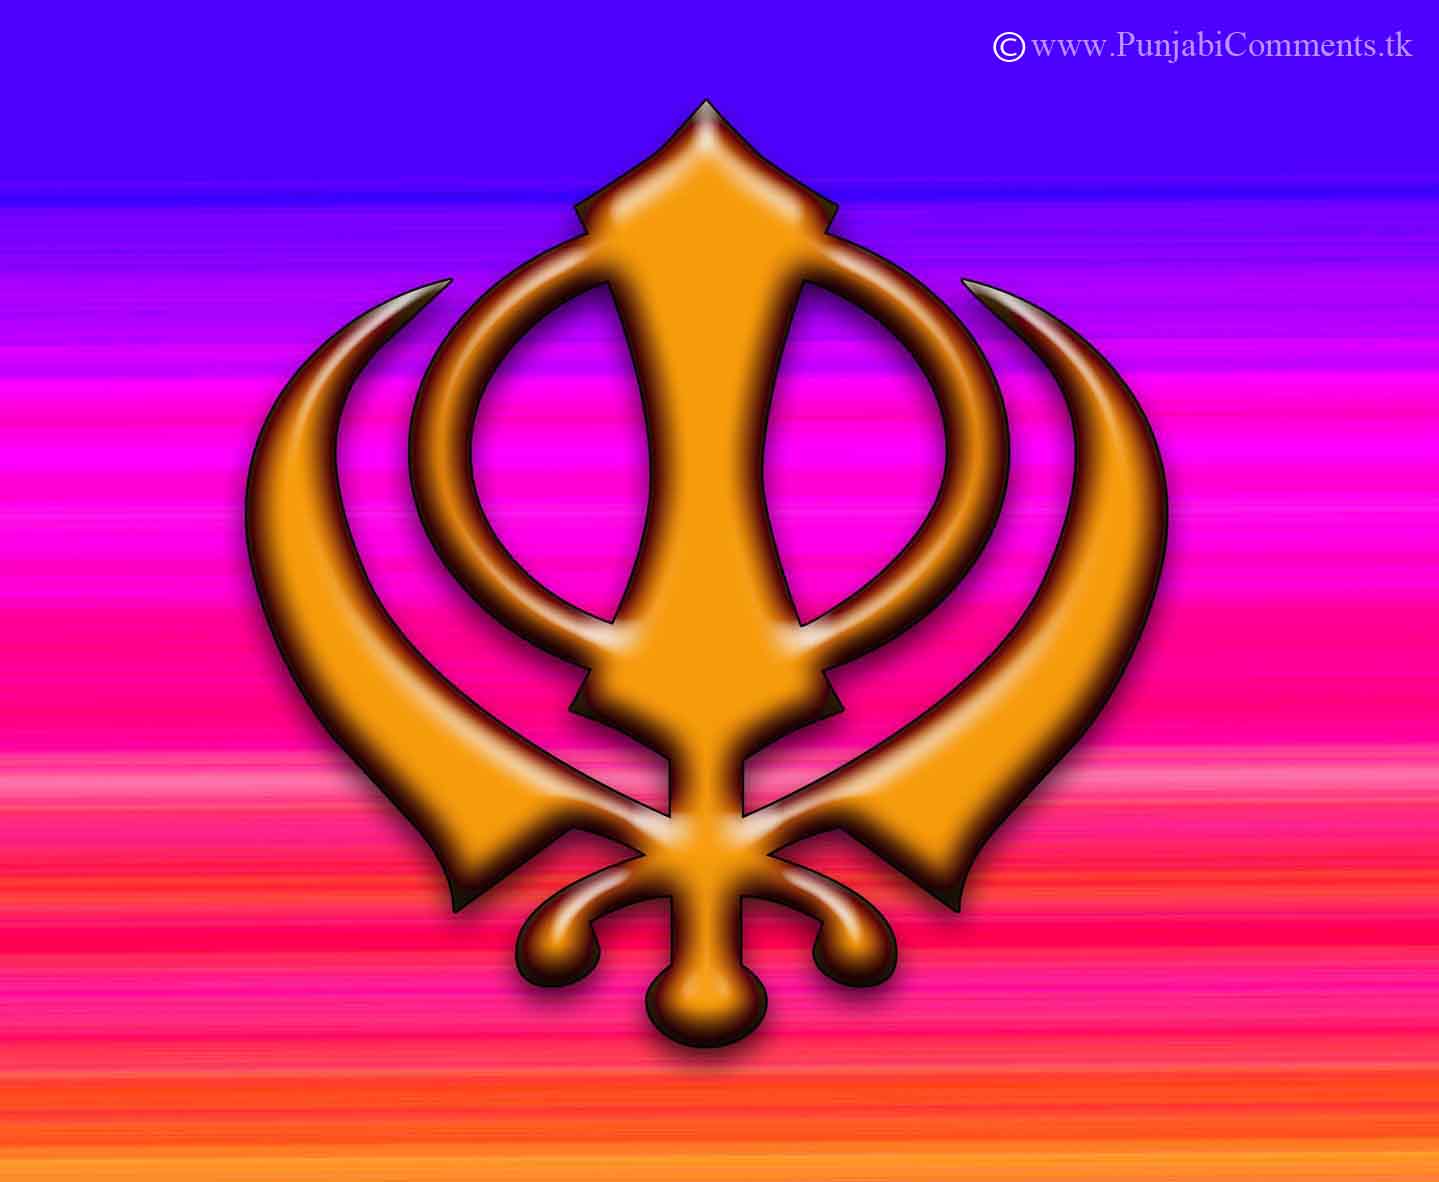 Wallpapers Pictures Photos Free Khanda Hd Photos Images Pictures